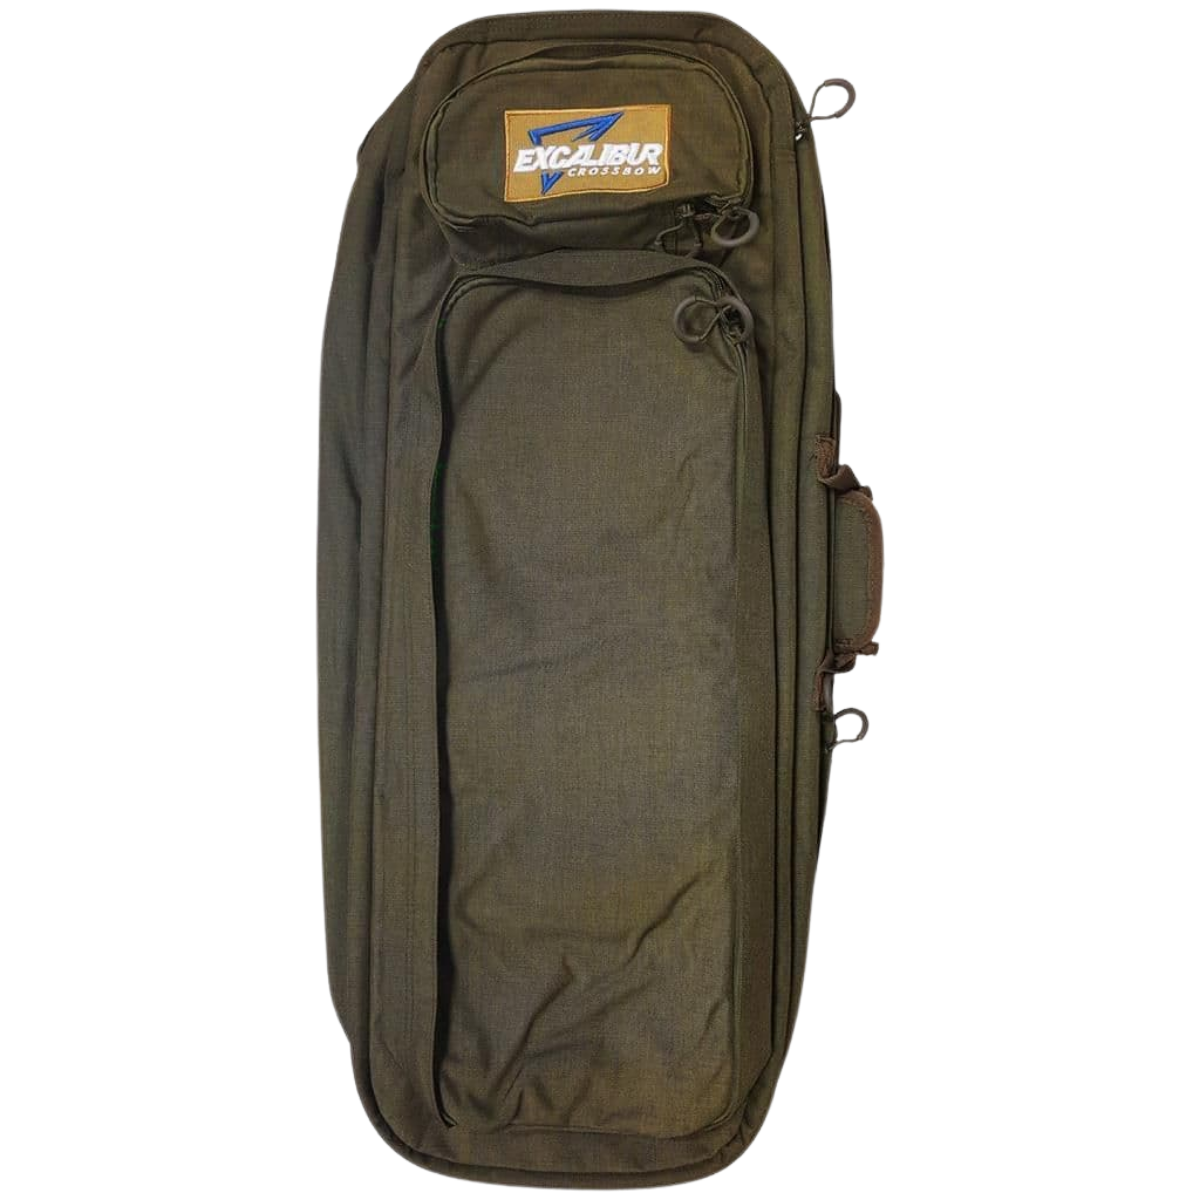 Excalibur Take-Down Explore Crossbow Case - Fast UK Shipping | Tactical Archery UK